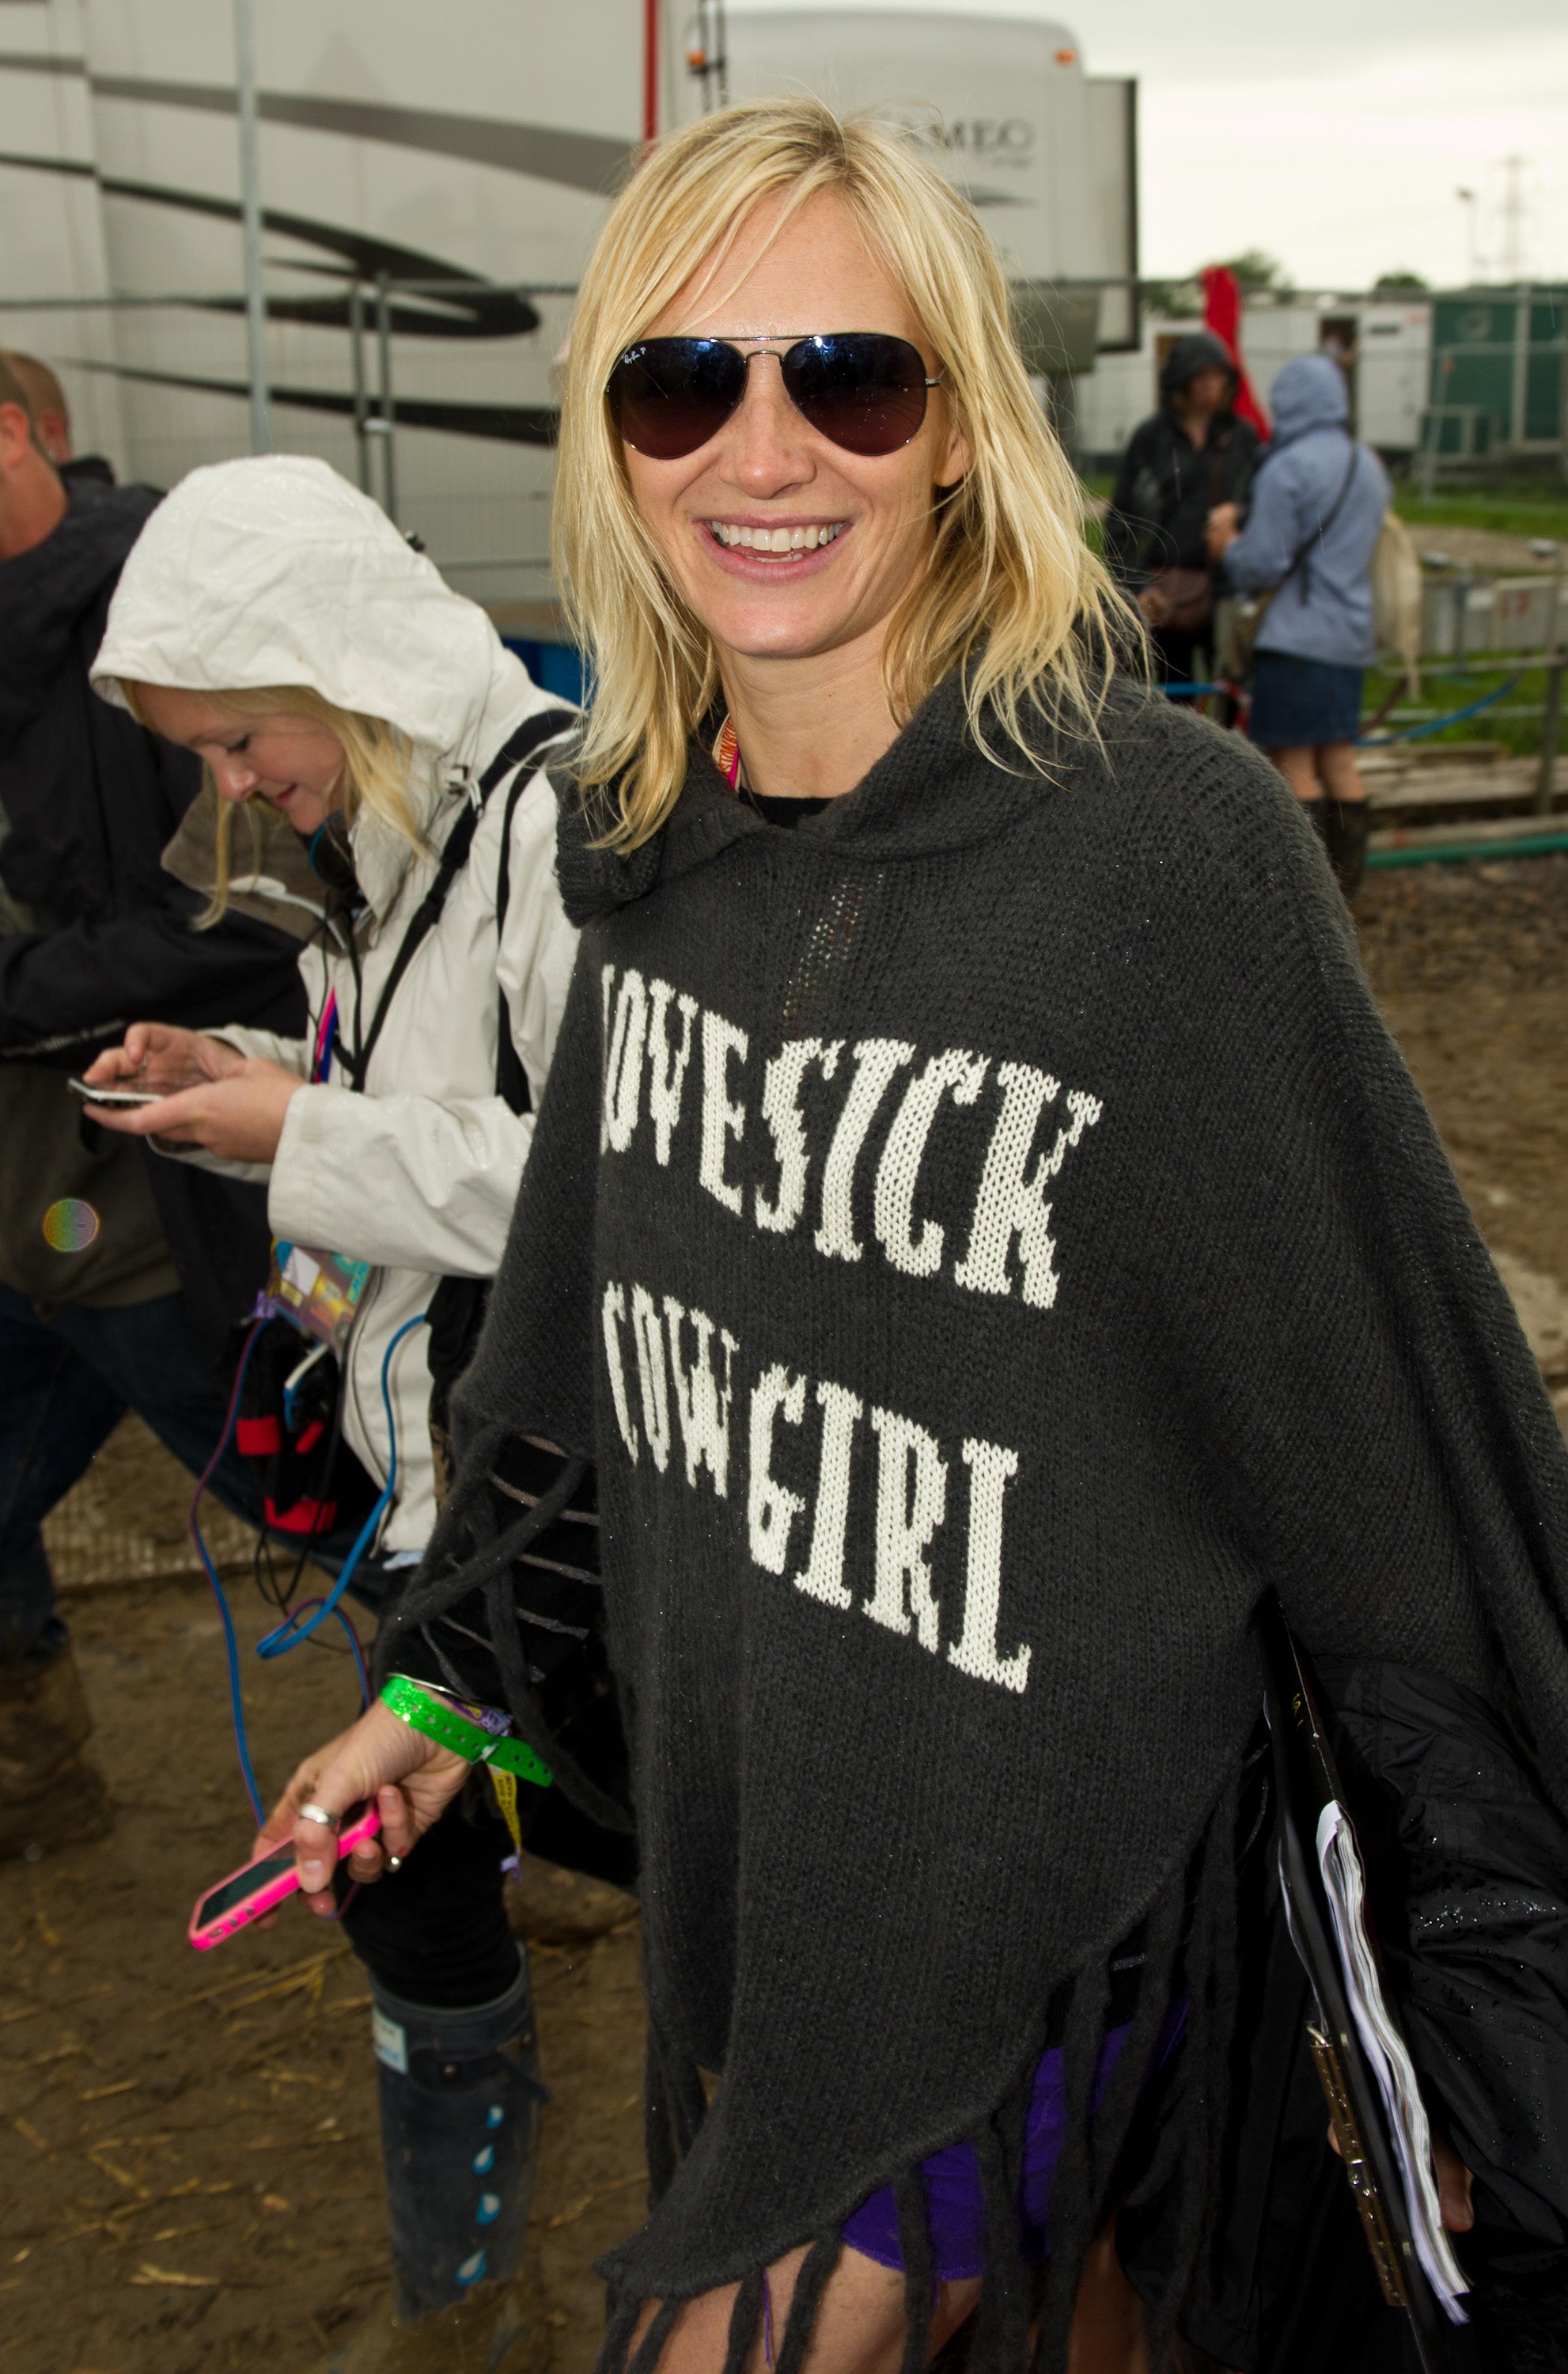 Whiley is the BBC's lead presenter at the Worthy Farm festival in Somerset.